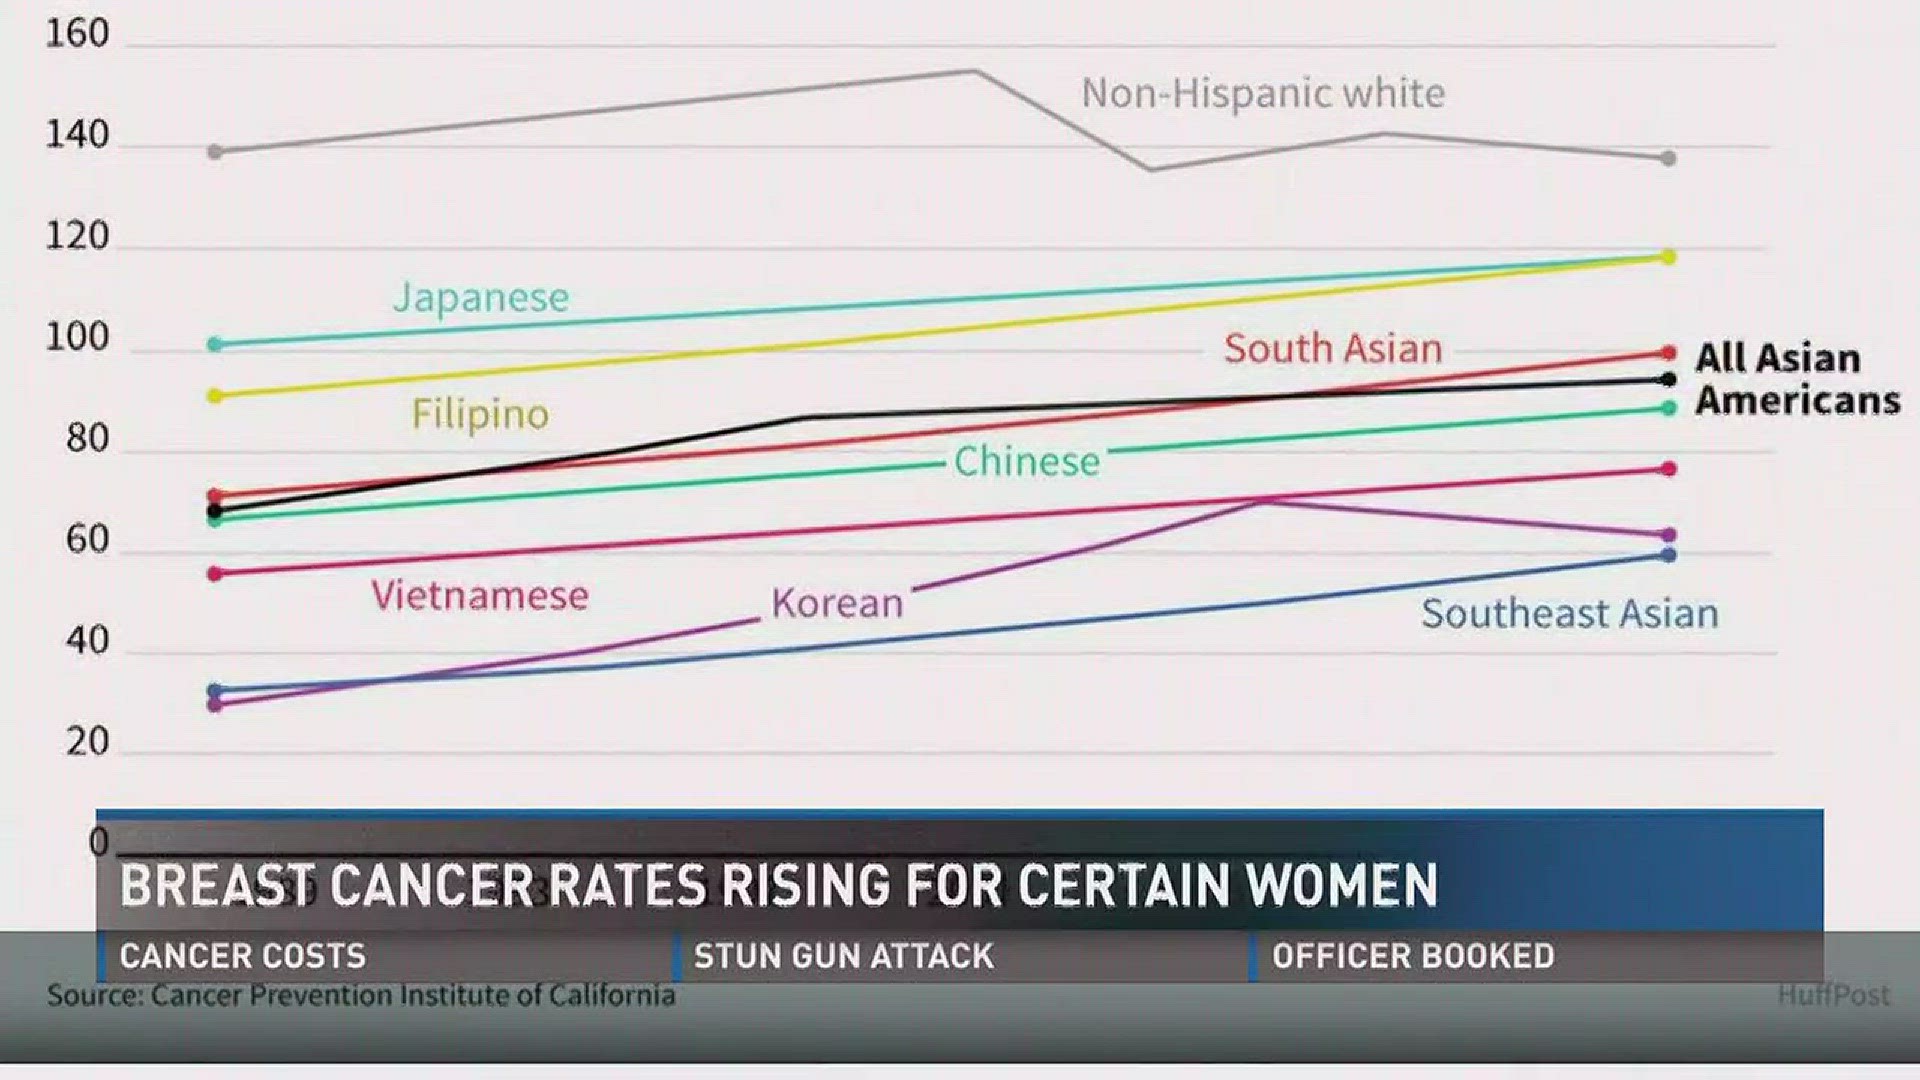 A study done by the Cancer Prevention Institute of California shows that breast cancer in Asian-American women is rising, while other ethnicities show a decline.